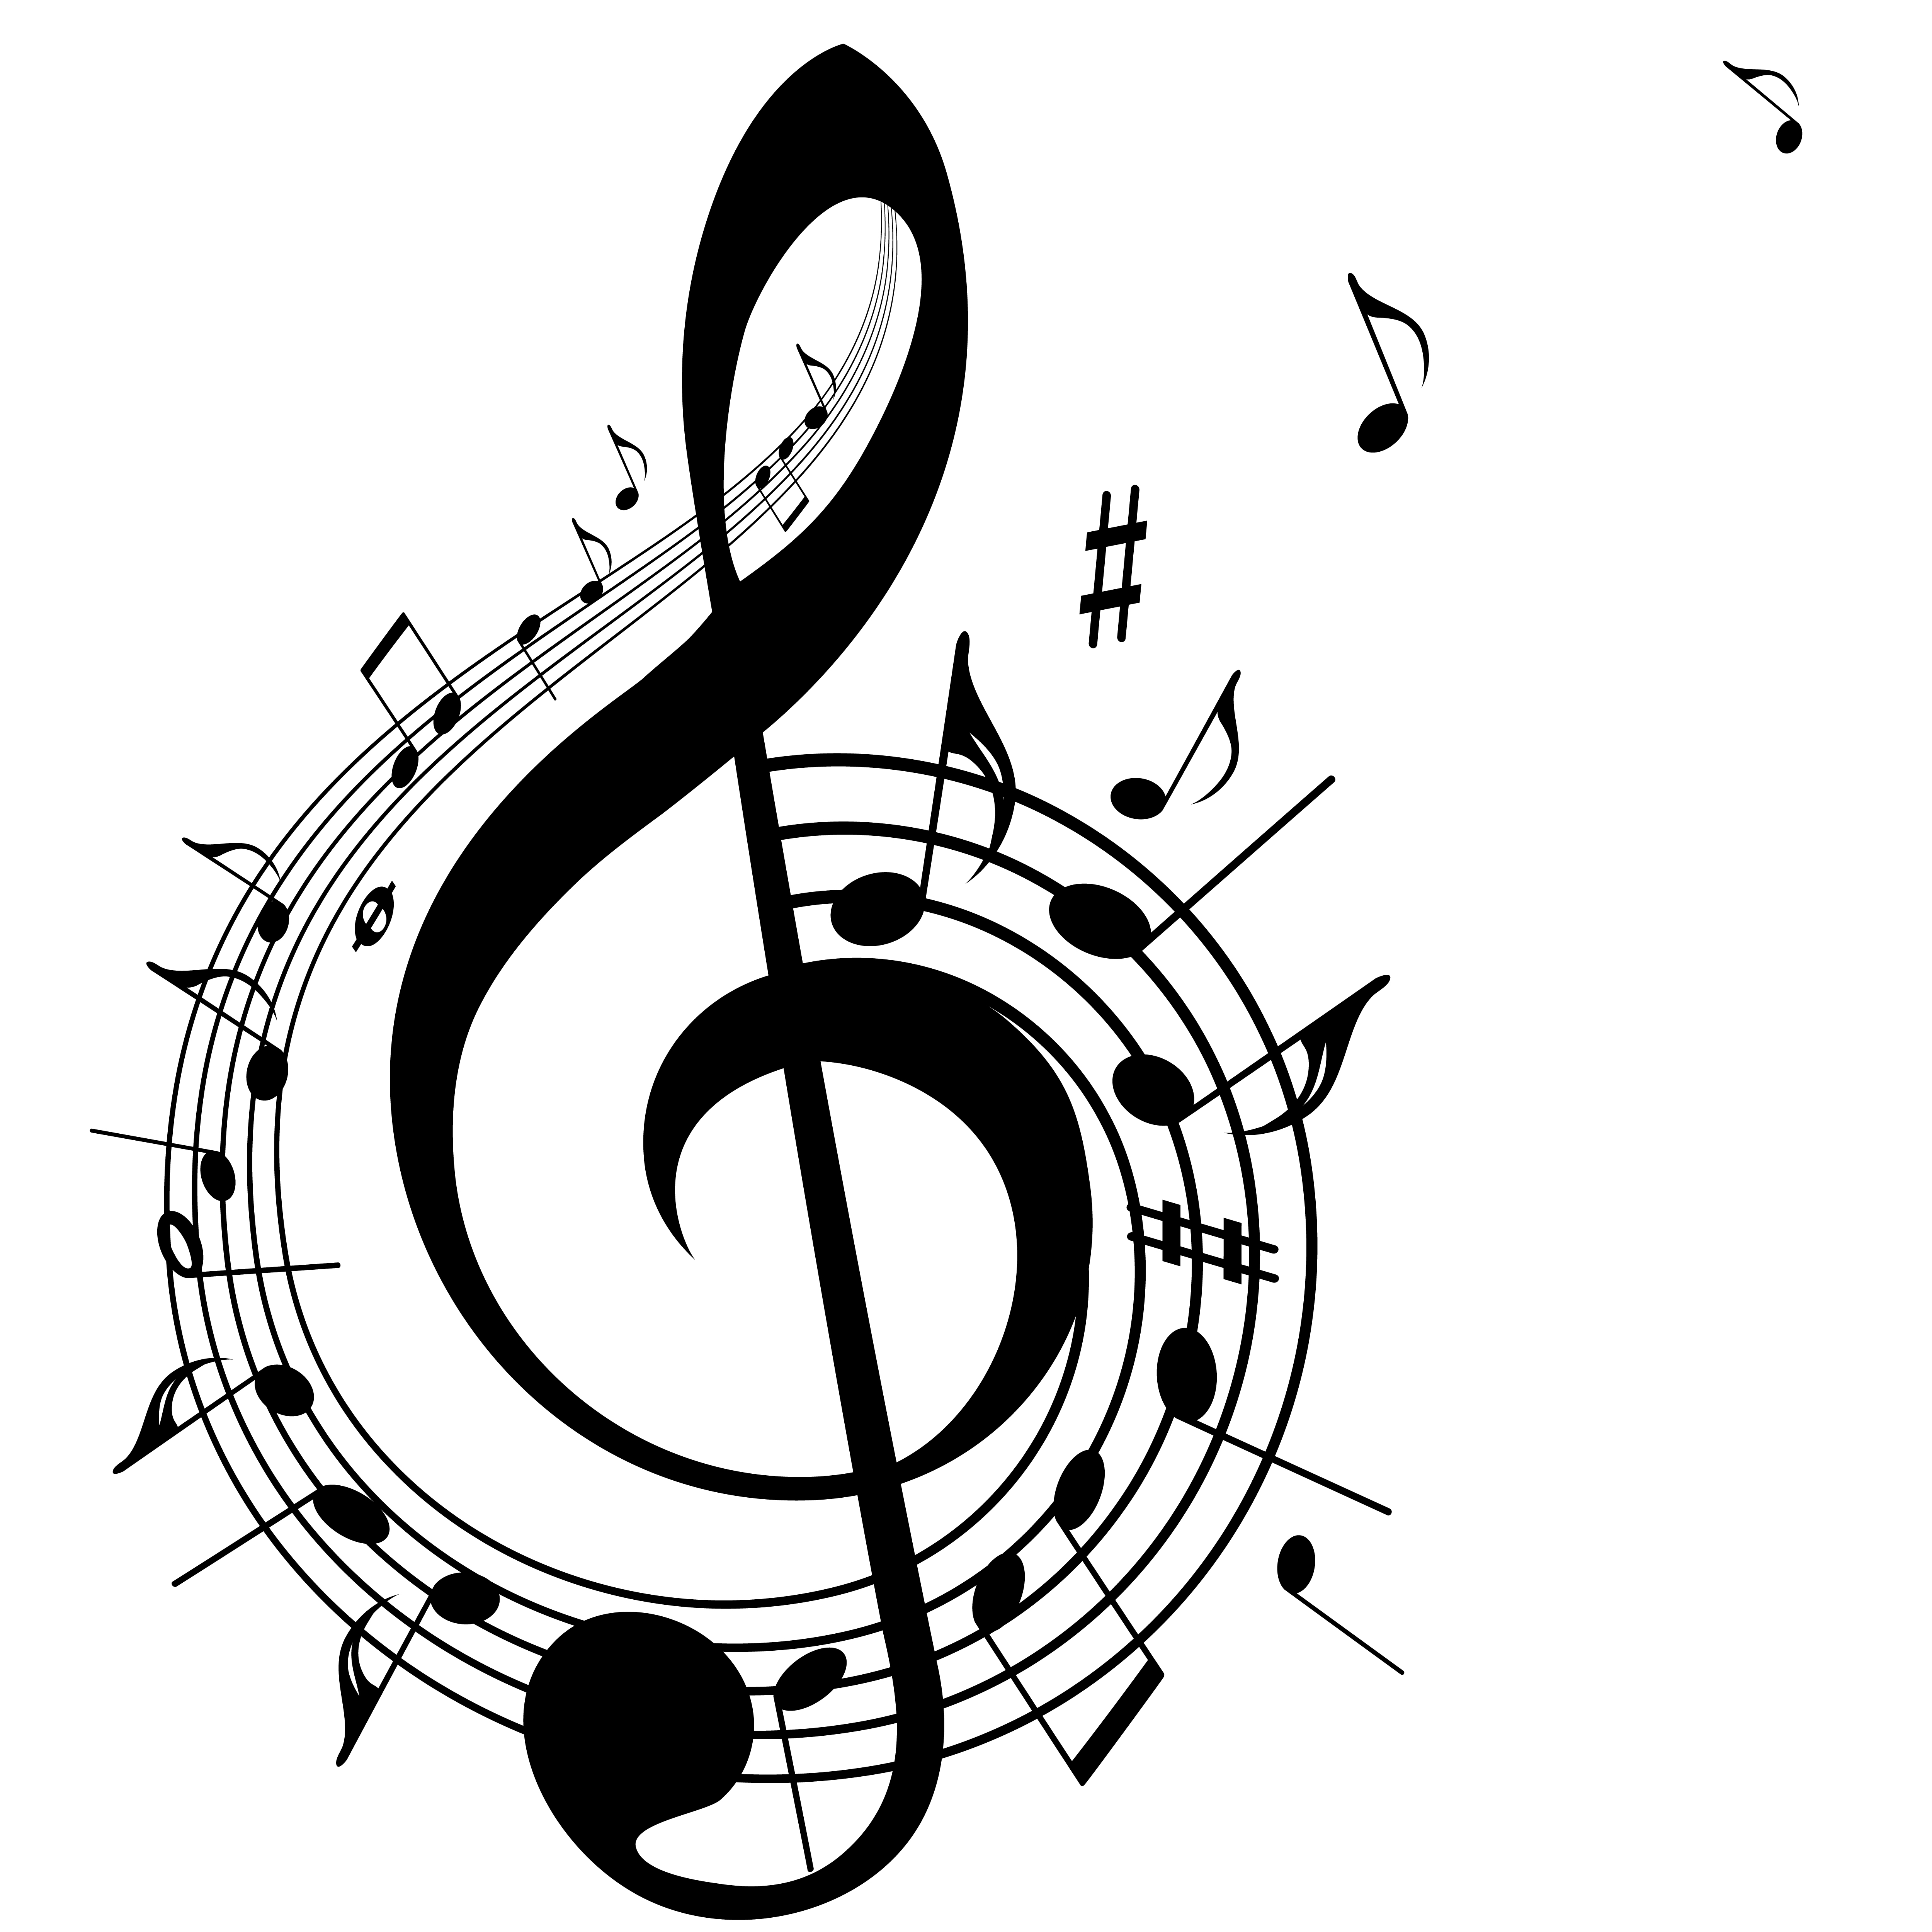 The meaning and symbolism of the word - «Music»